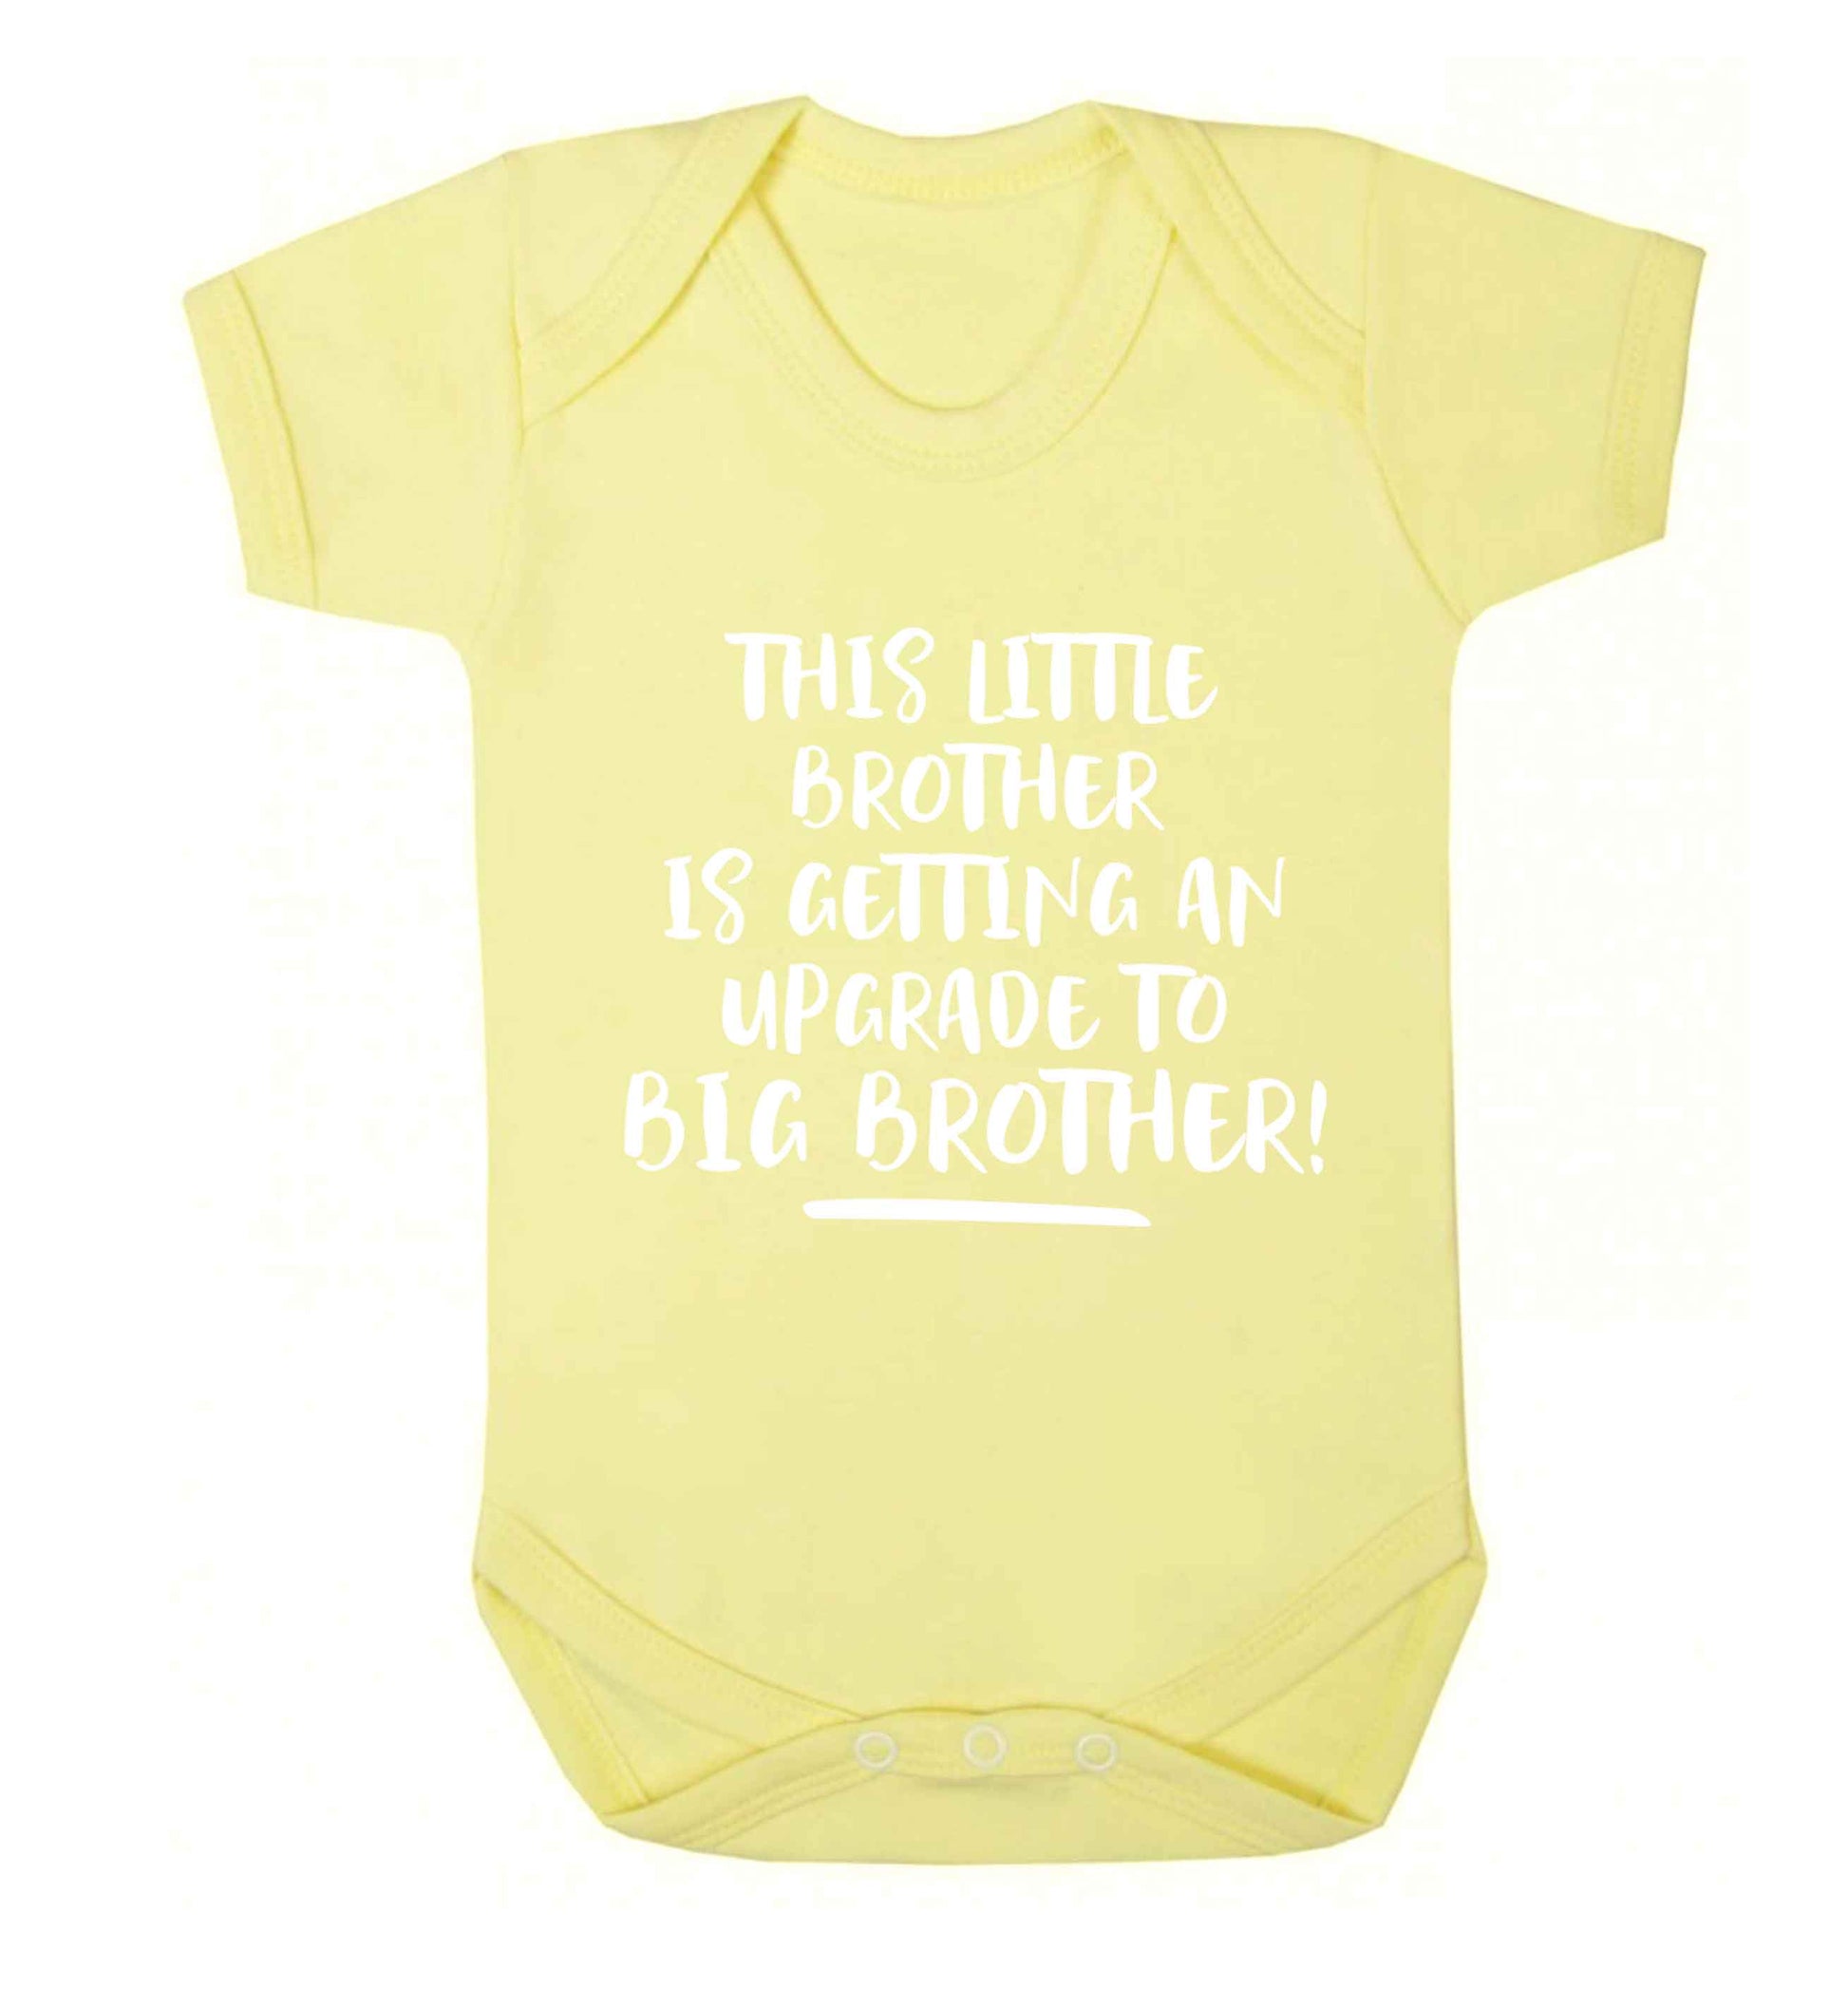 This little brother is getting an upgrade to big brother! Baby Vest pale yellow 18-24 months